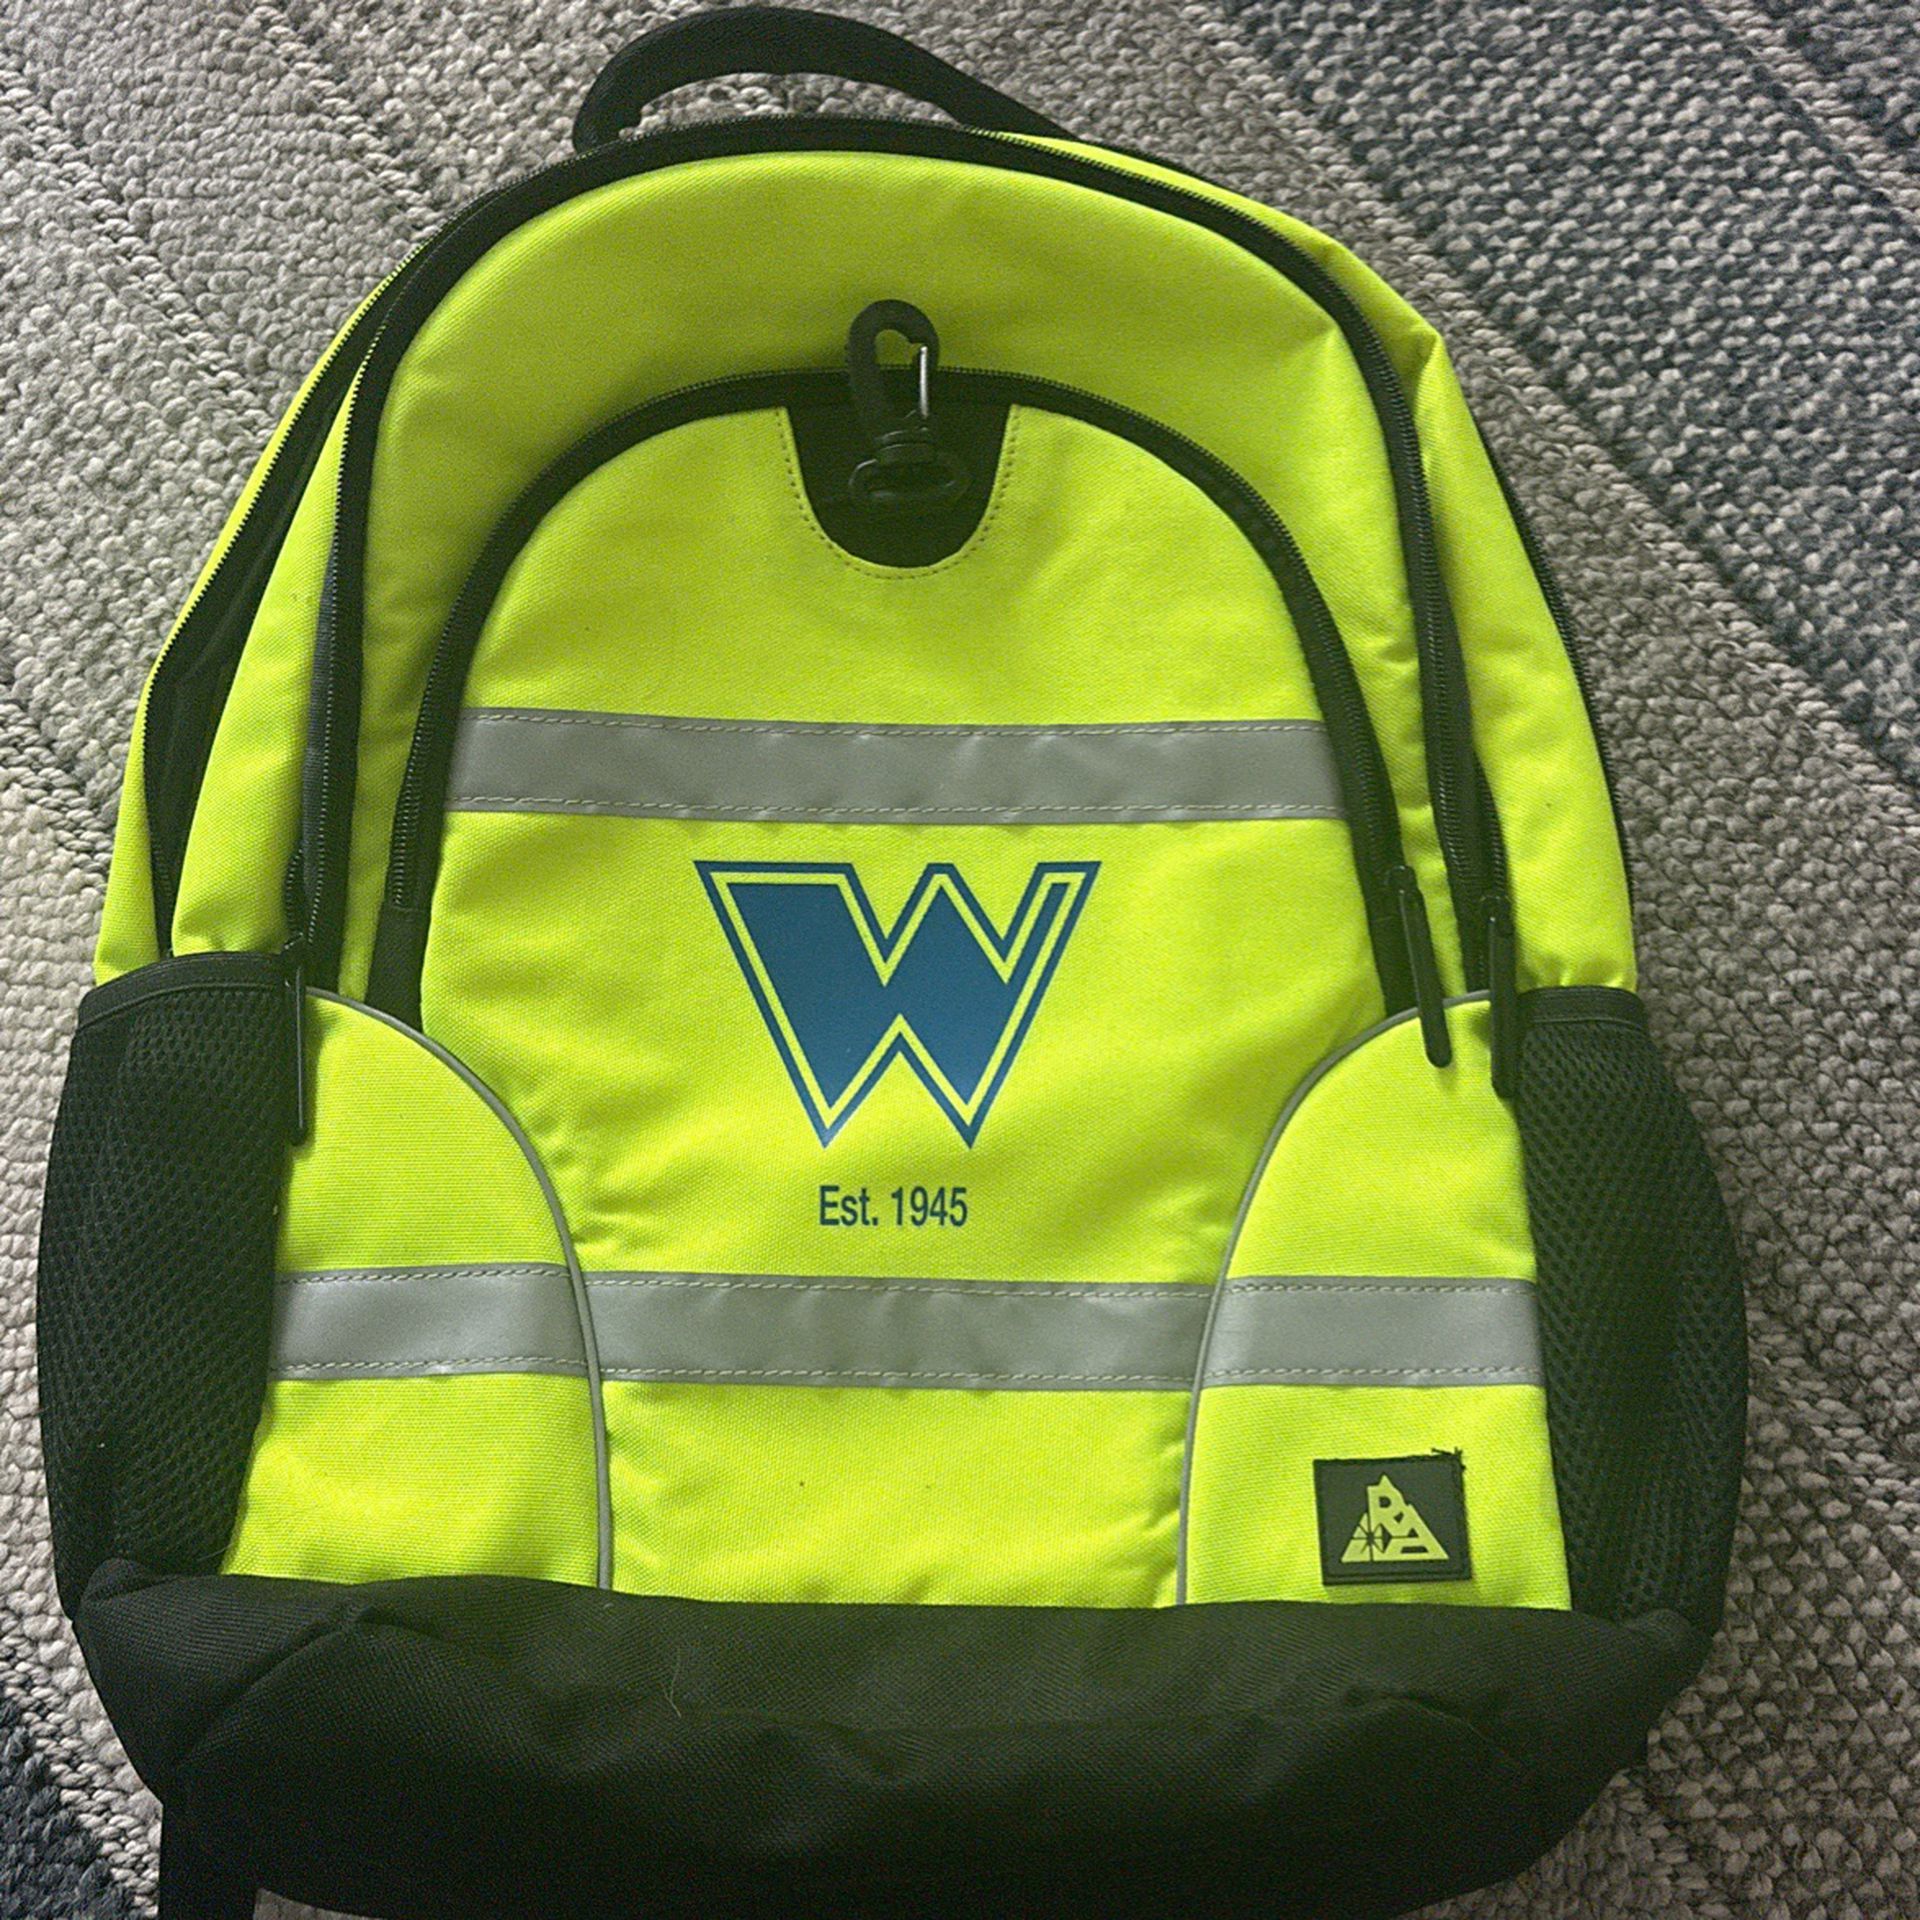 Construction Backpack